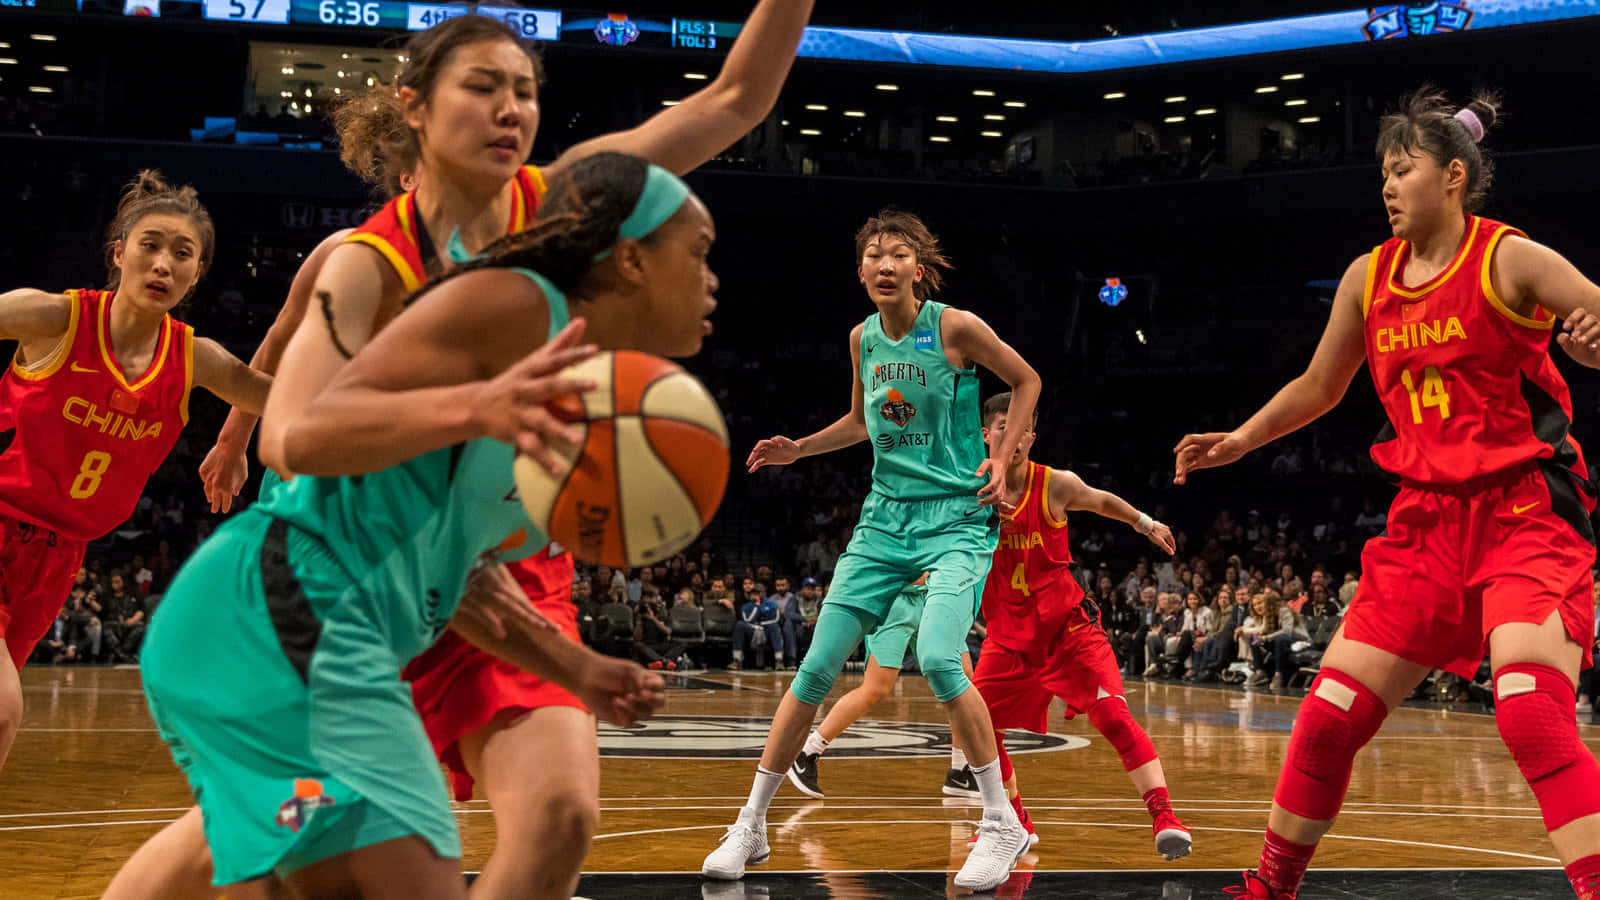 A Group Of Women Basketball Players Are Playing A Game